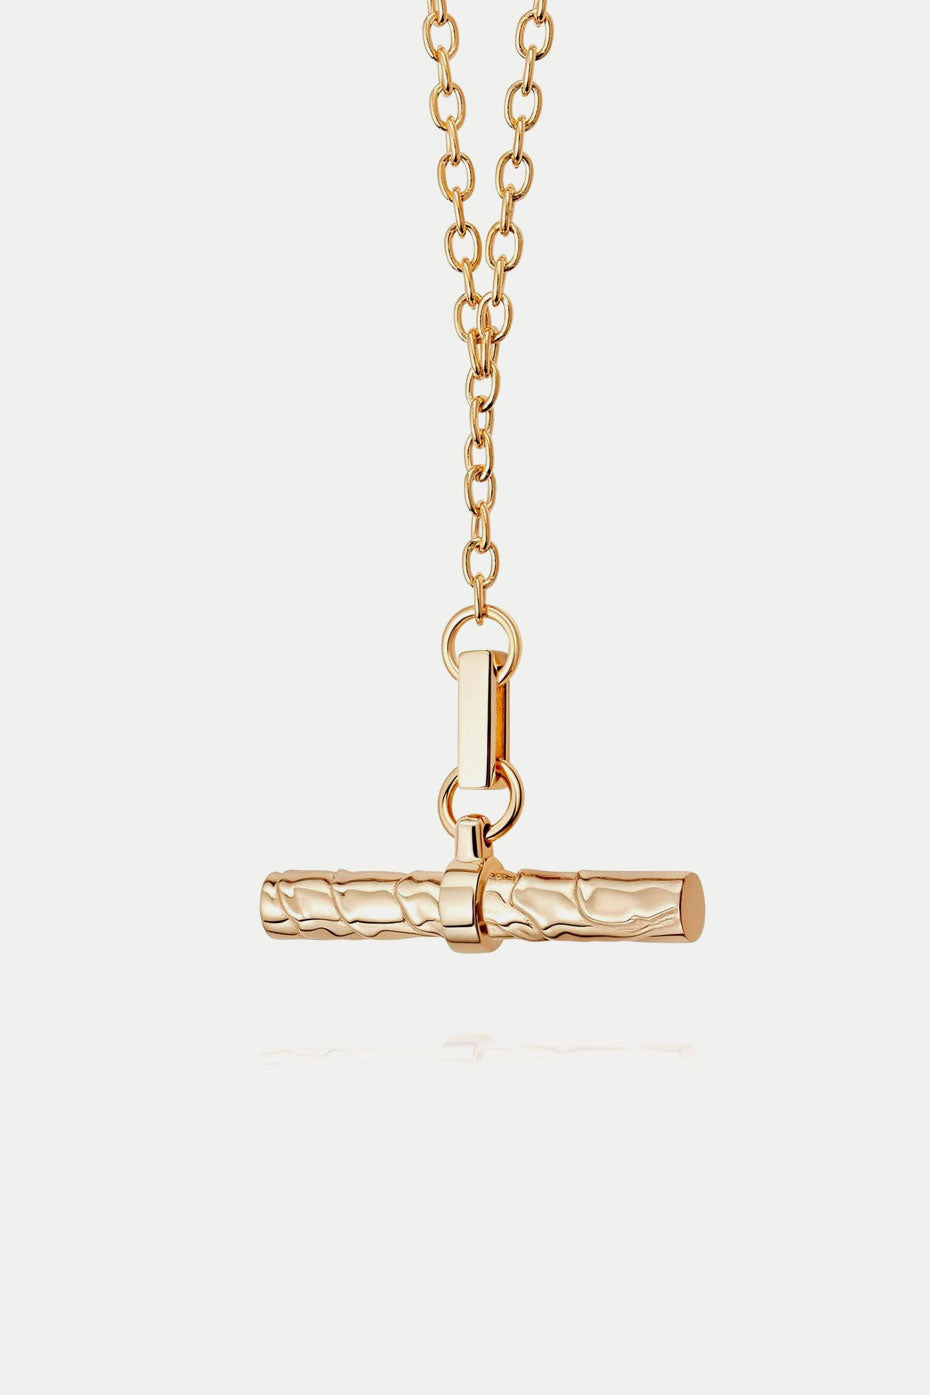 Daisy London Gold Treasures Oyster T-bar Necklace